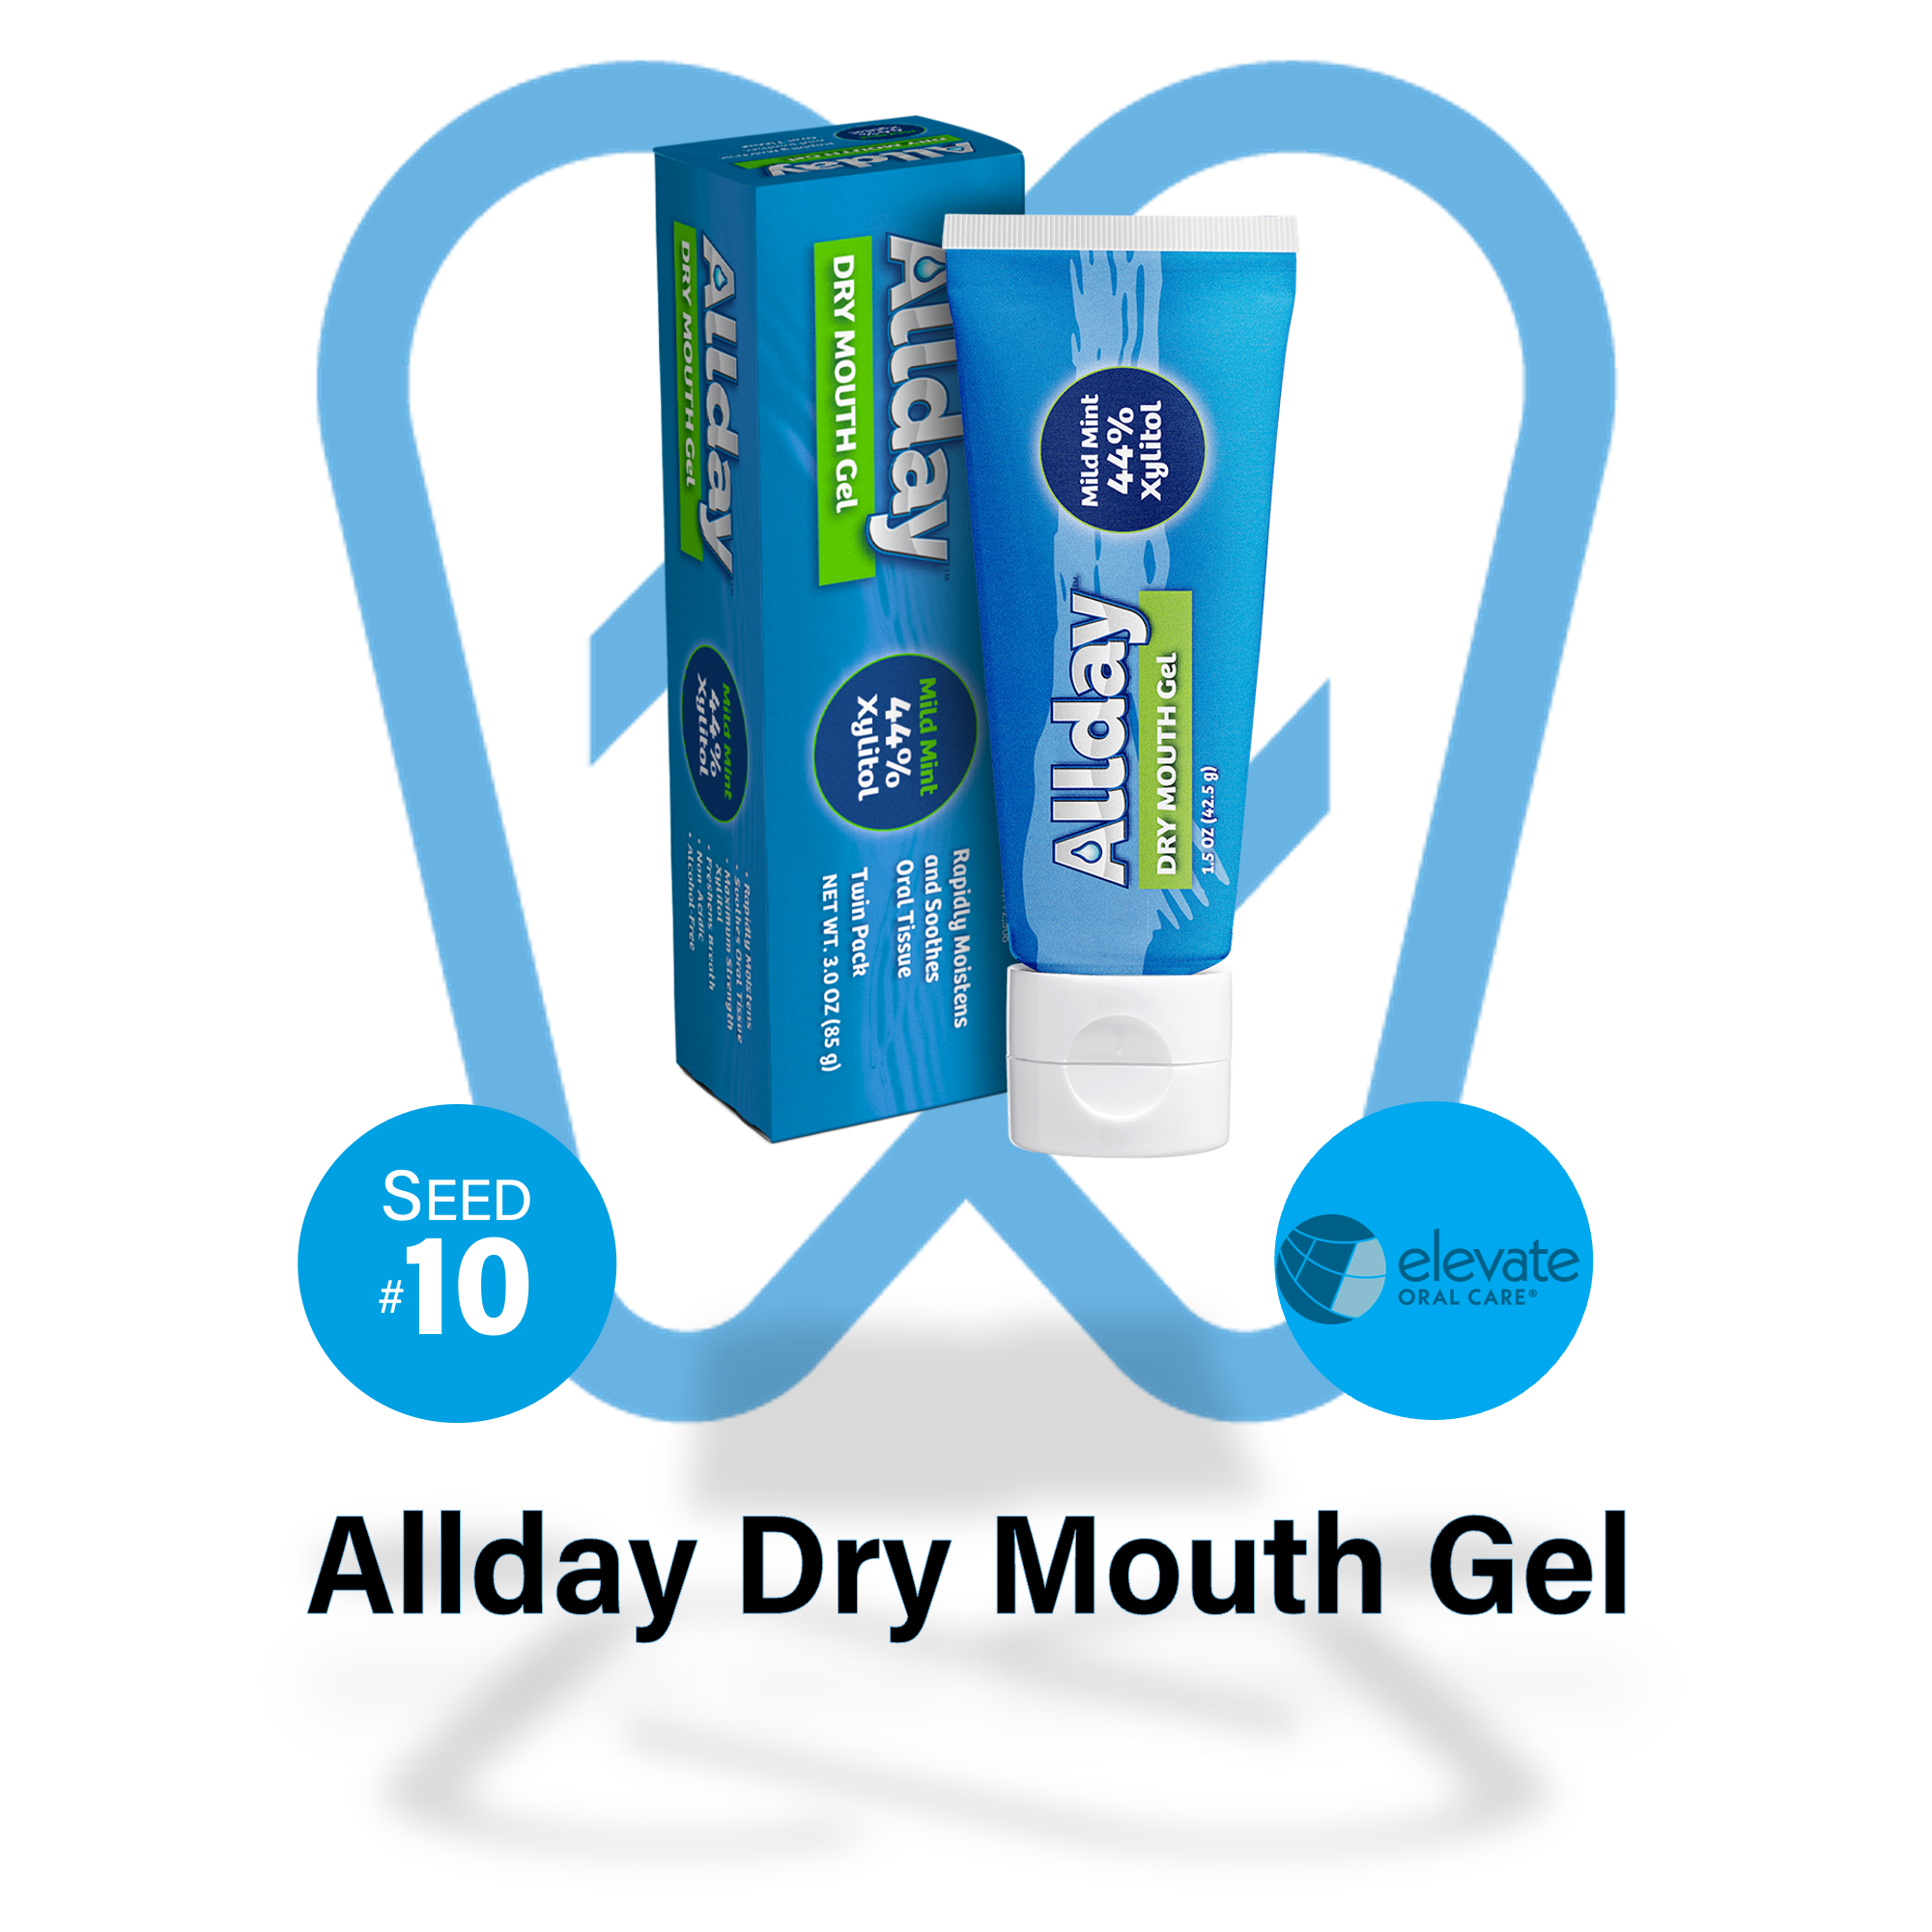 Allday® Dry Mouth Gel from Elevate Oral Care